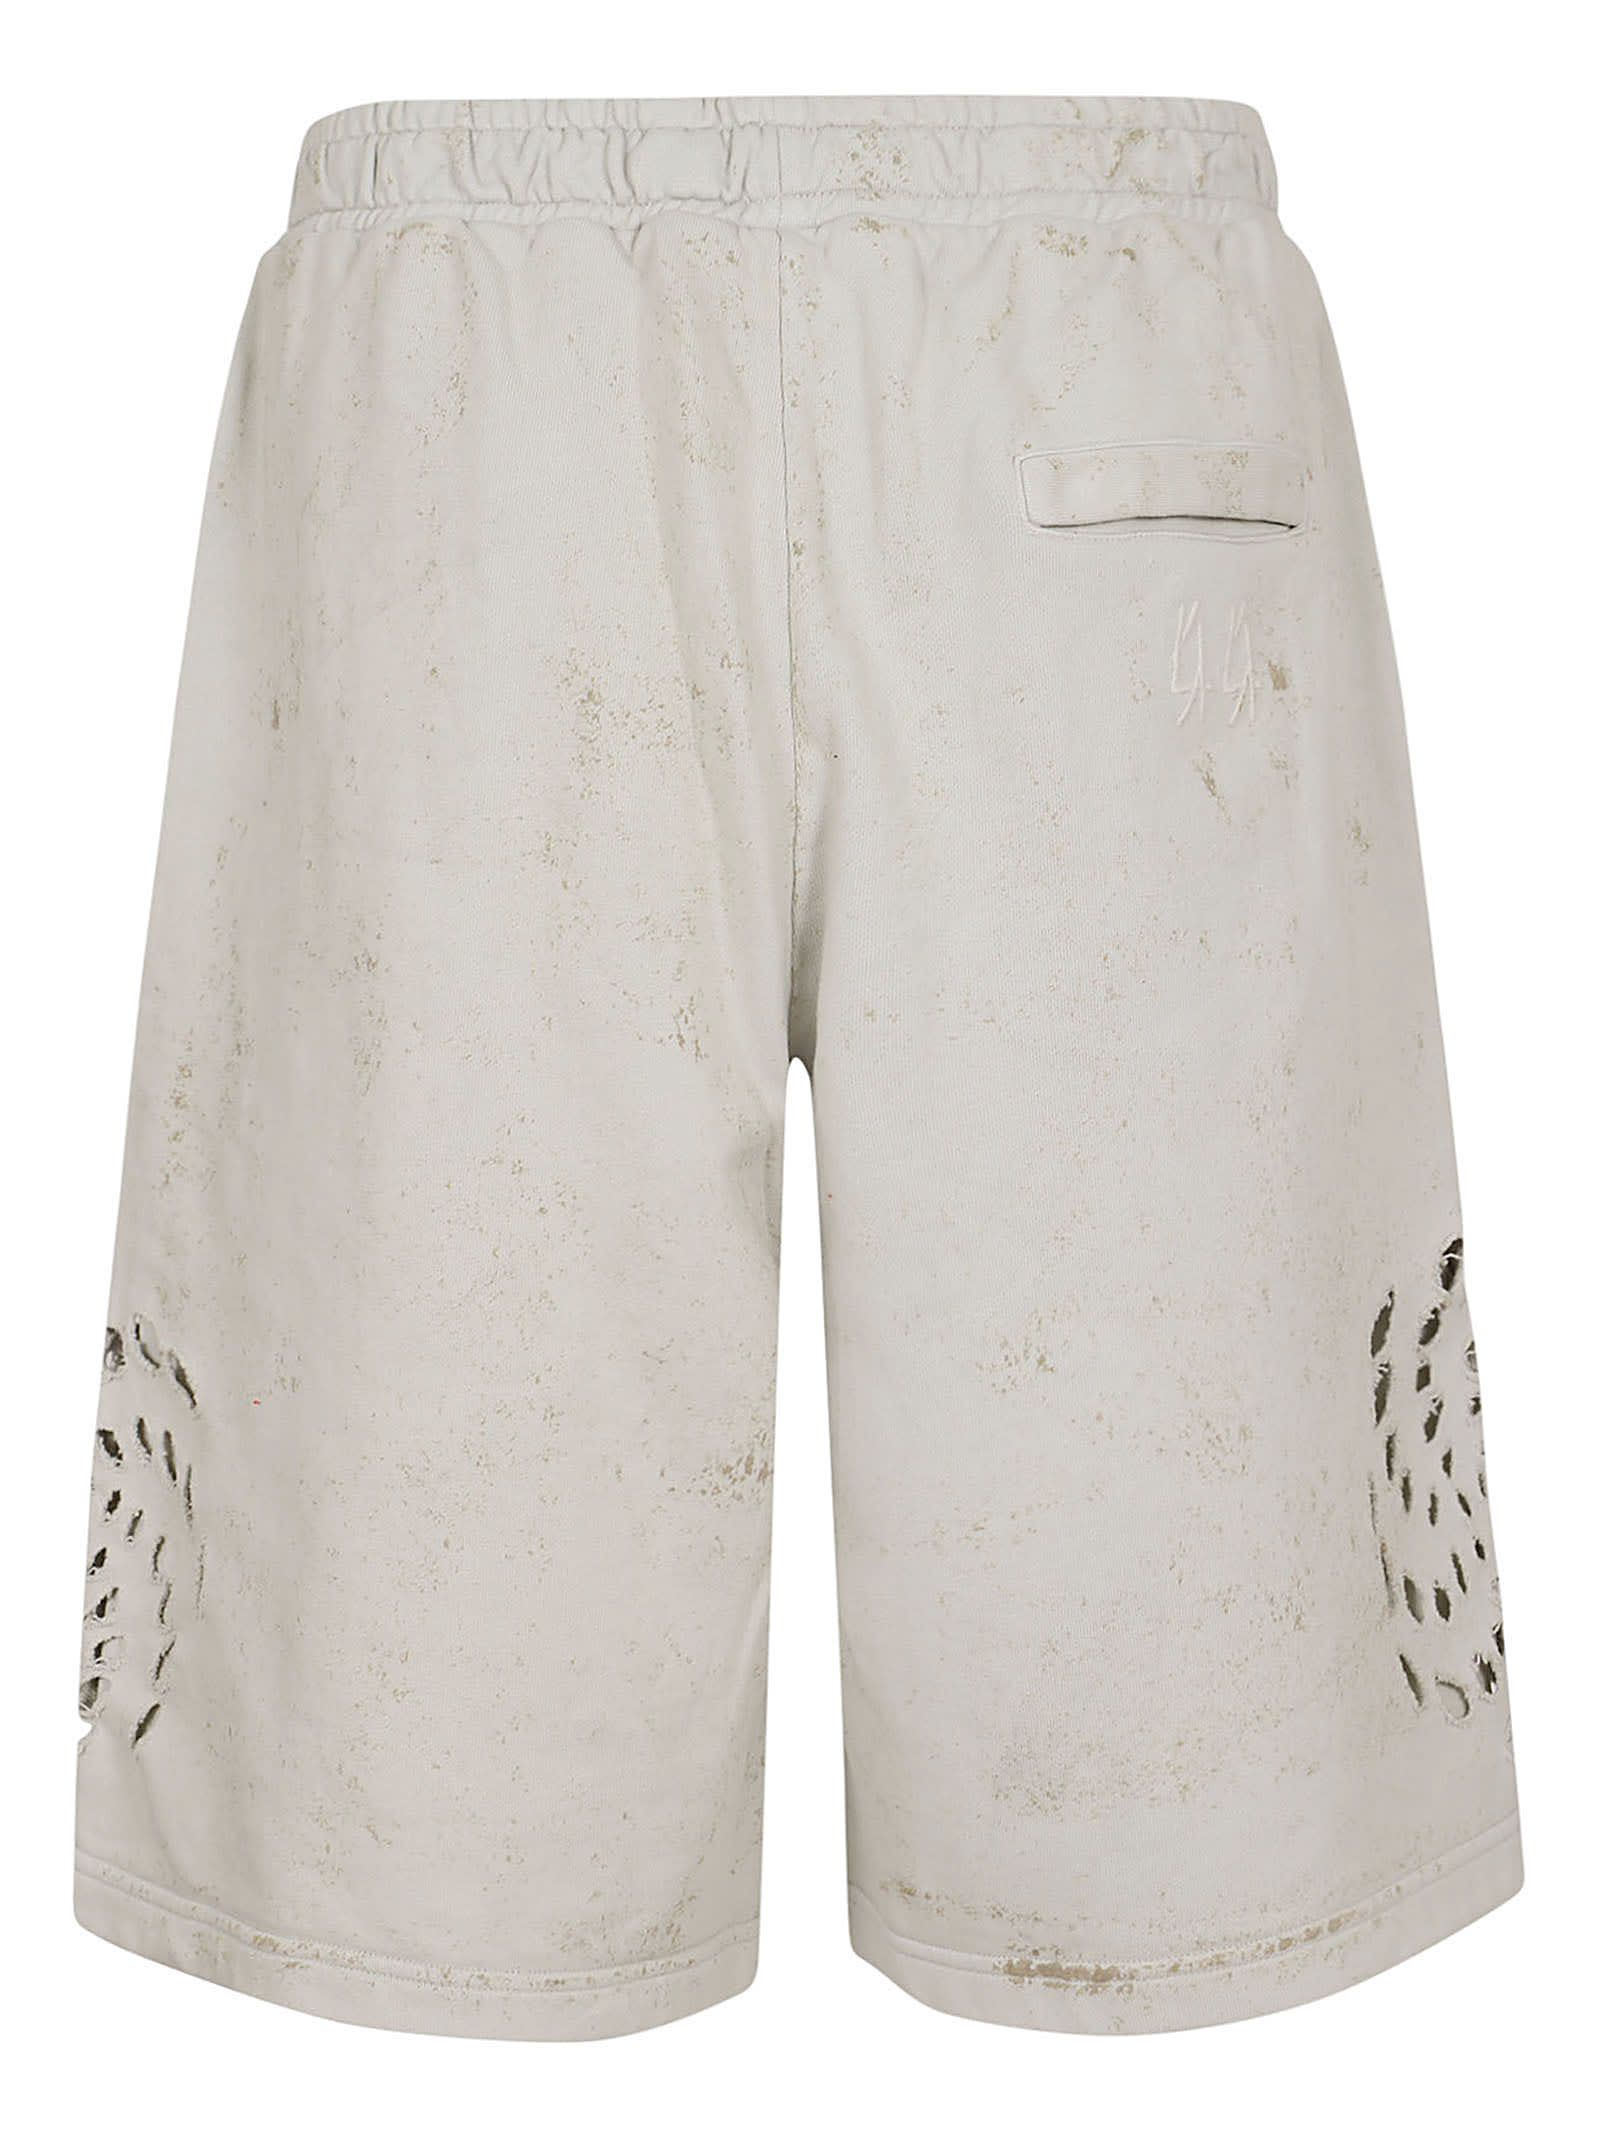 Shop 44 Label Group Trip Short Jersey In Dirty White Gyps